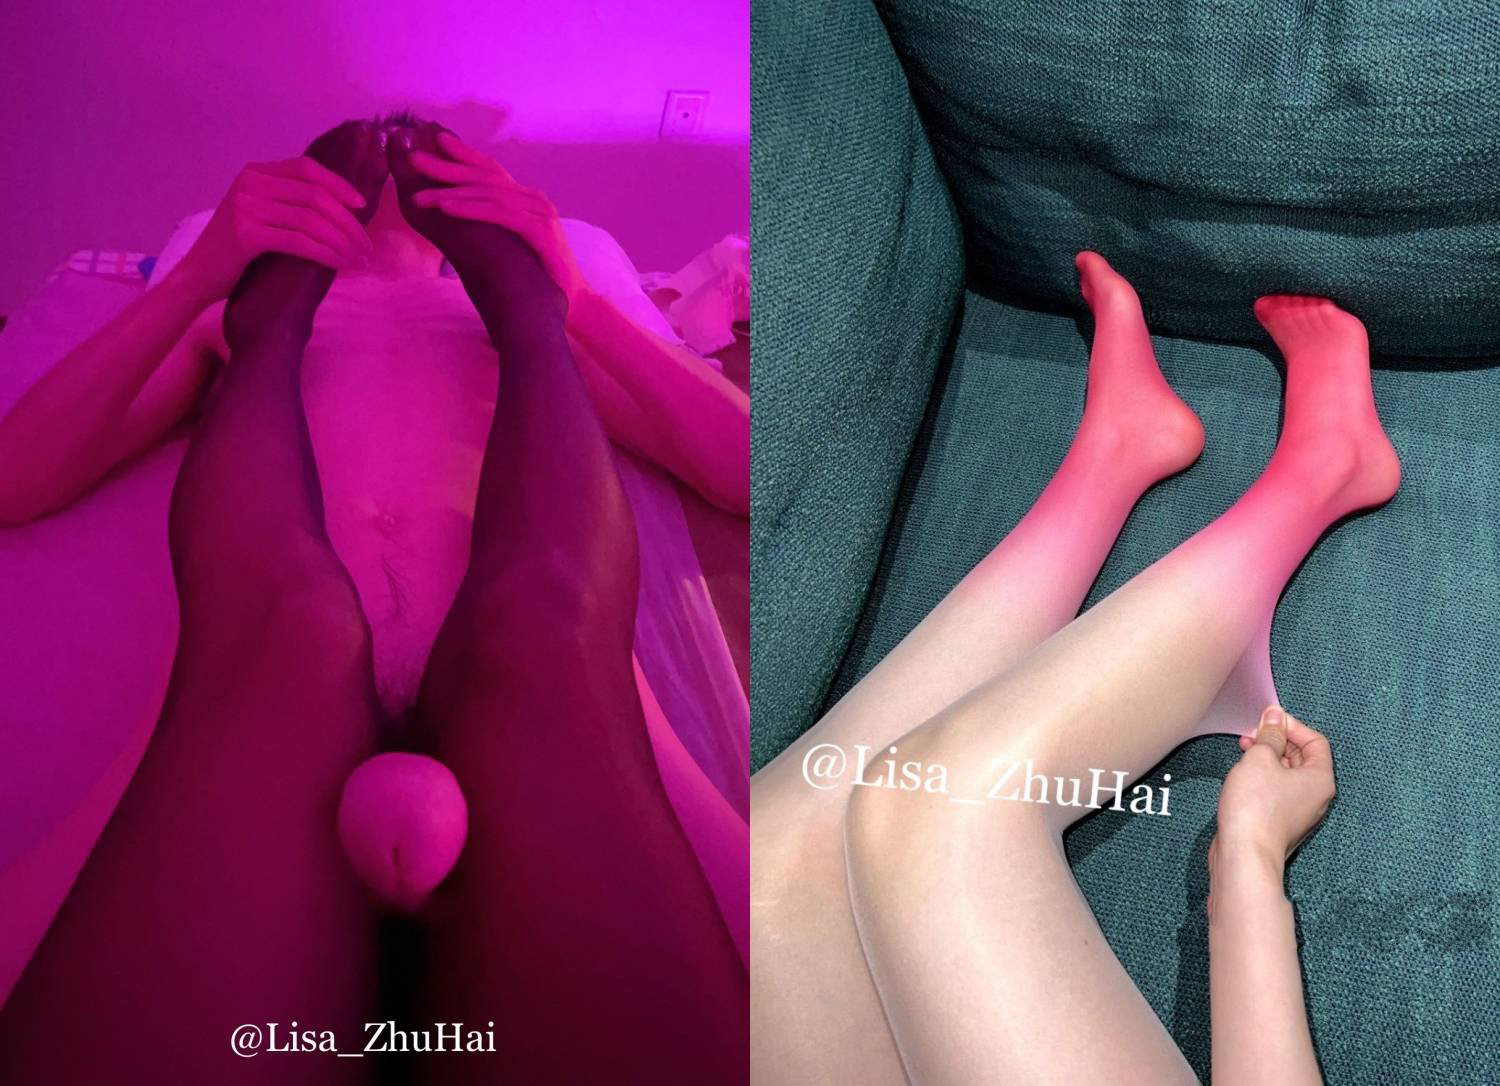 The latest $666 telegram group welfare ~ Zhuhai legs and feet Miss Twitter red [Lisa_ZhuHai] private shoot ~ turtle responsibility squeezing cum bare feet stockings oil pushing cumshot Collection (2)